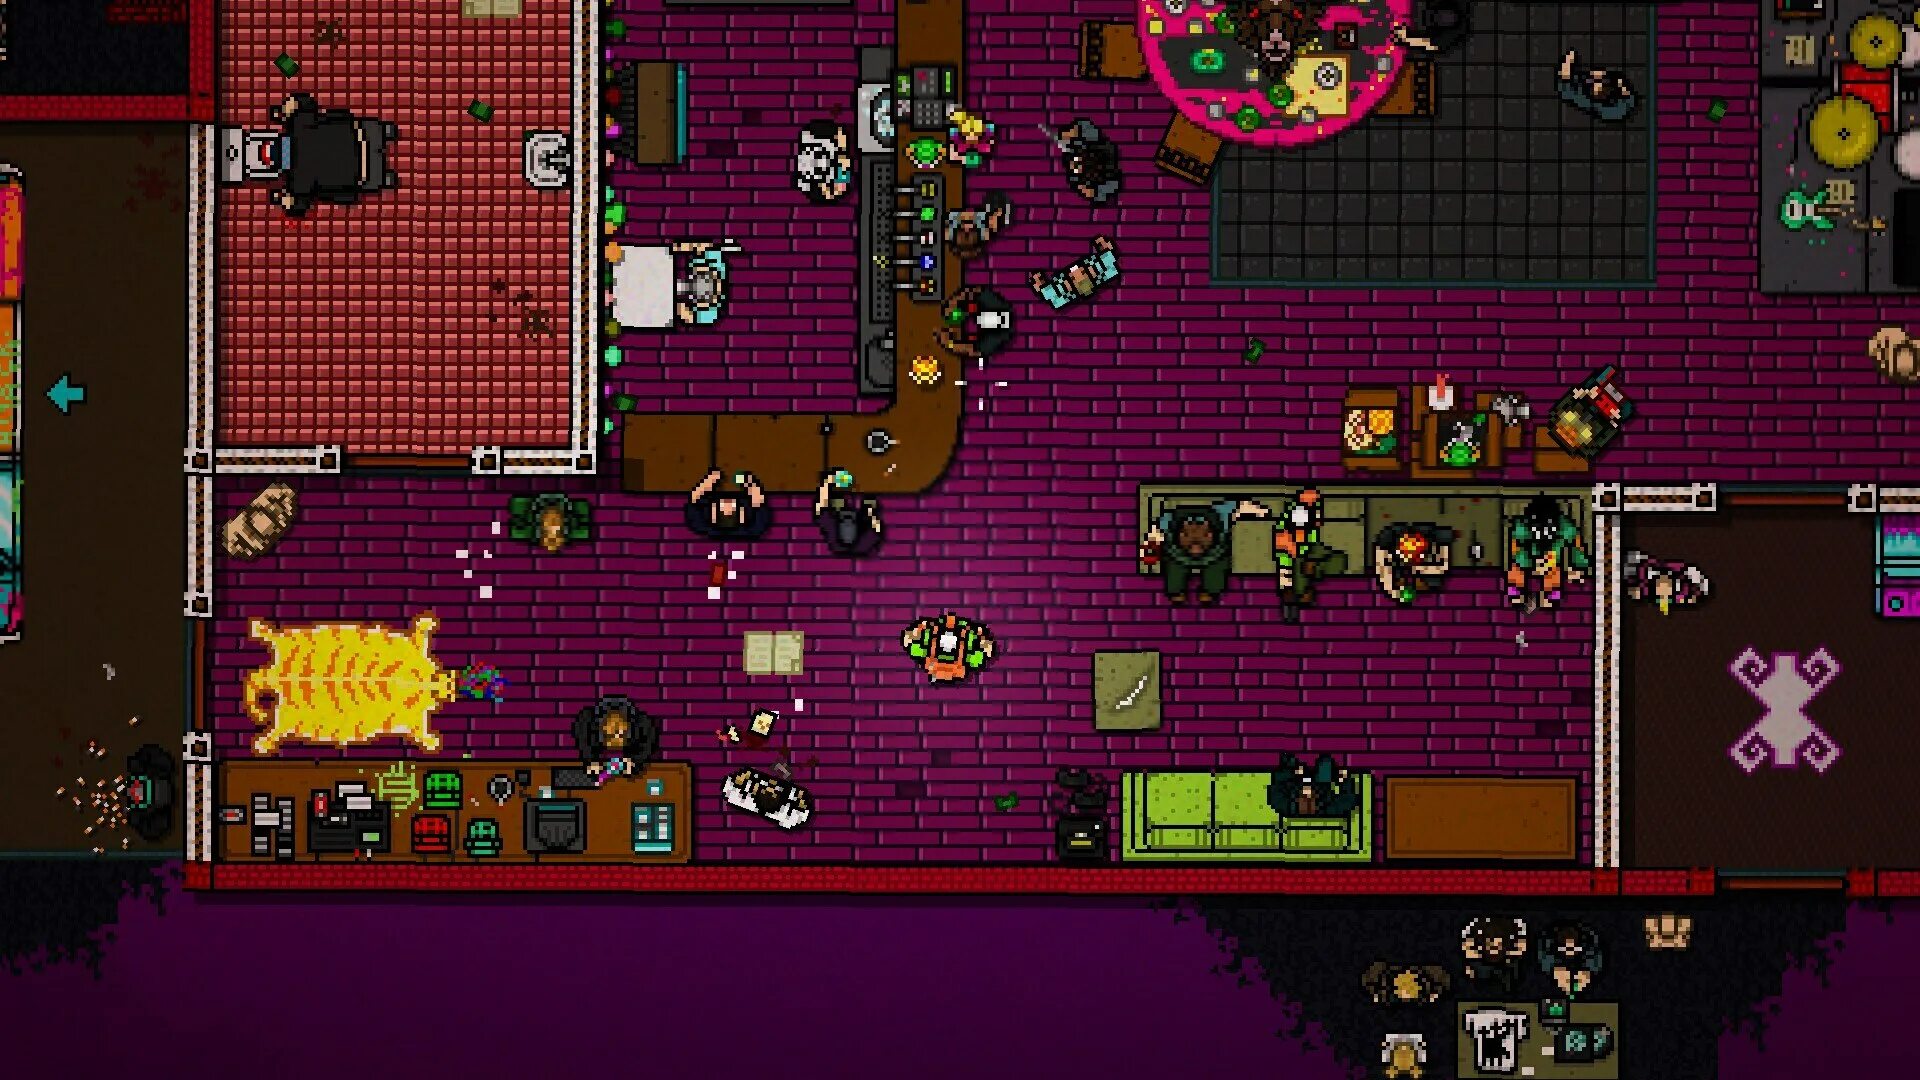 Hotline Miami 2: wrong number. Hotline Miami 2: wrong number ps4. Hotline Miami 2 wrong number эмулятор. Hotline Miami 2: wrong number солдаты.